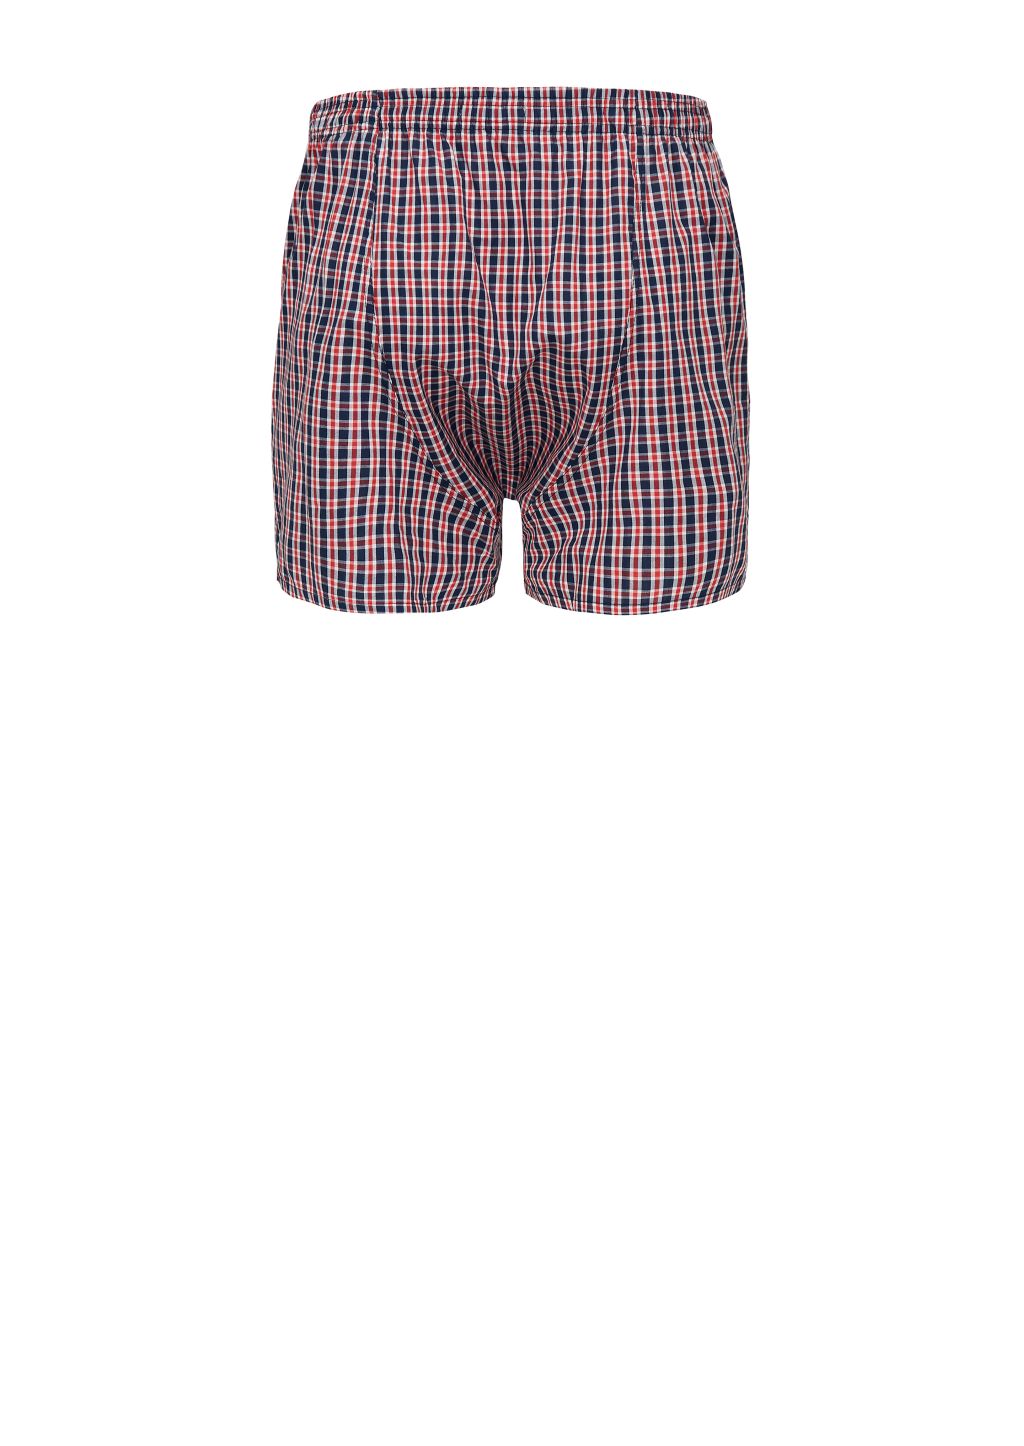 Männer Boxershorts #Checked Blue/White/Red Checked XL